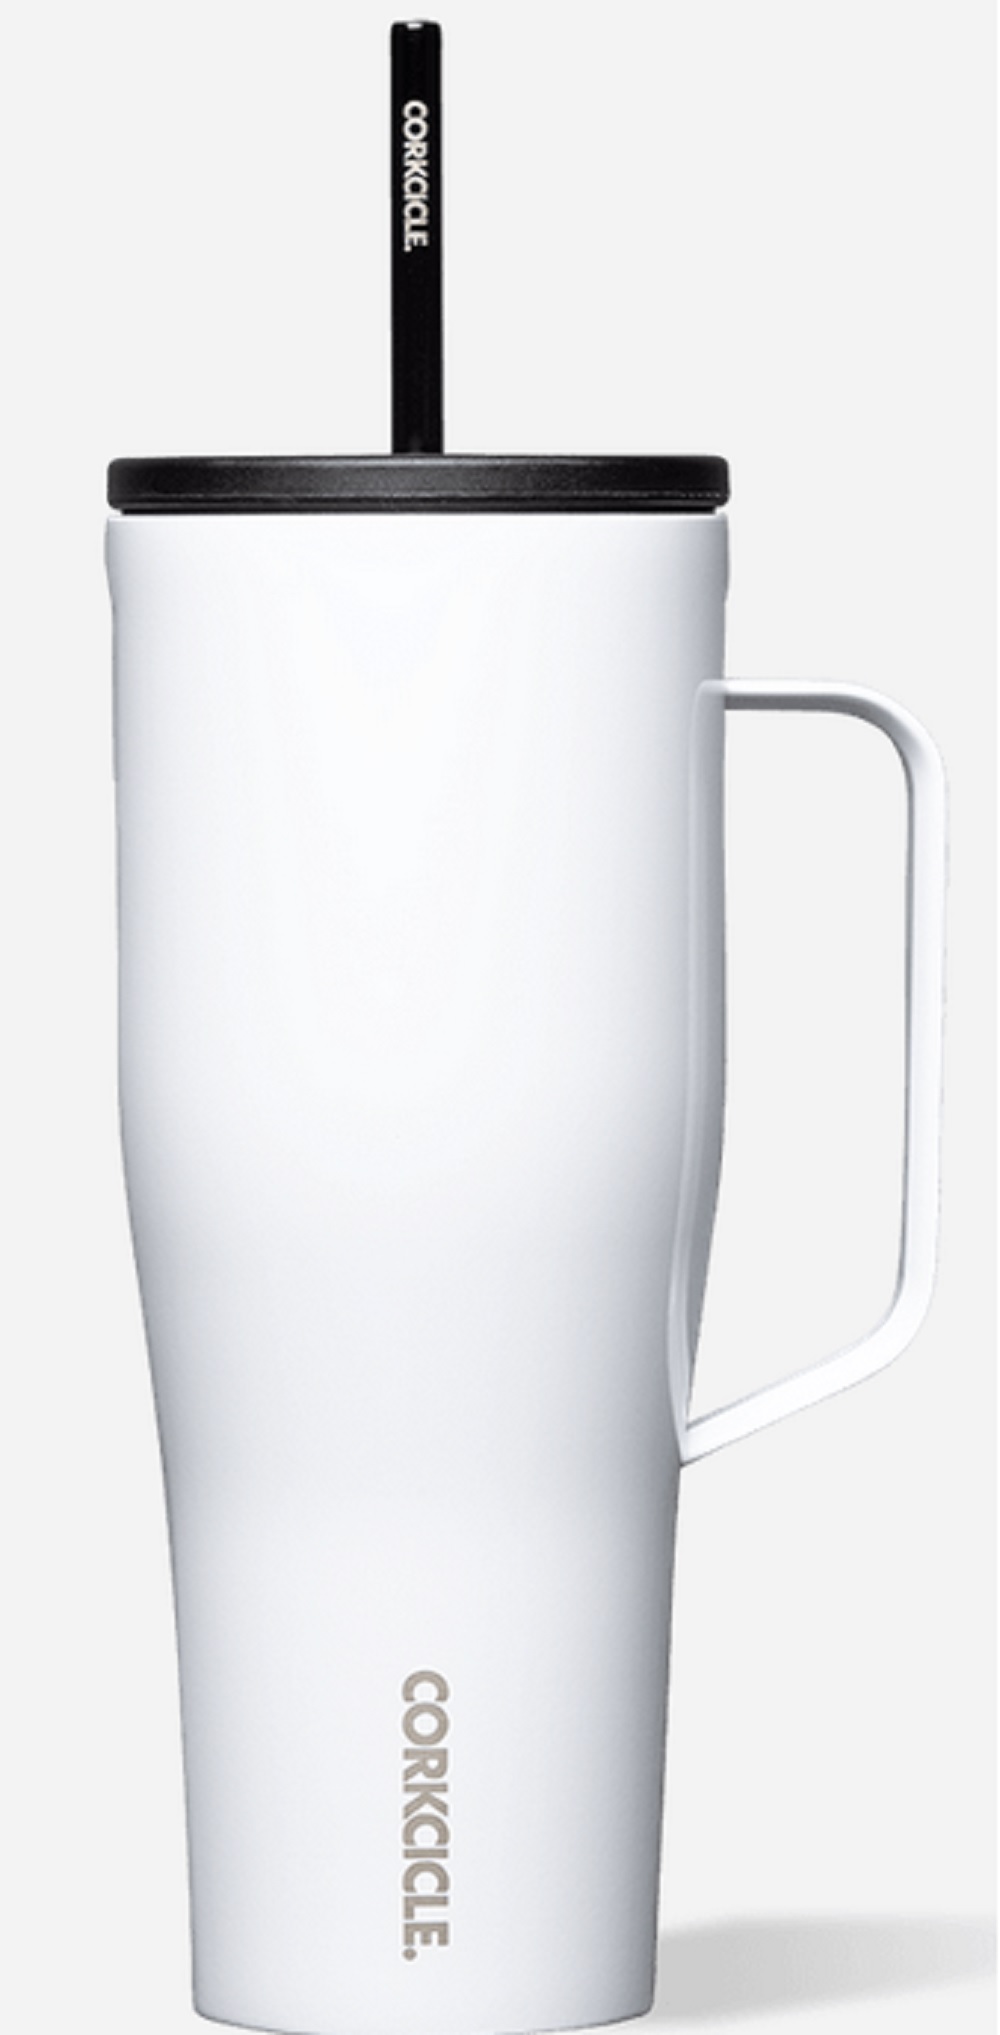 Corkcicle 30oz. Cold Cup XL in Gloss White